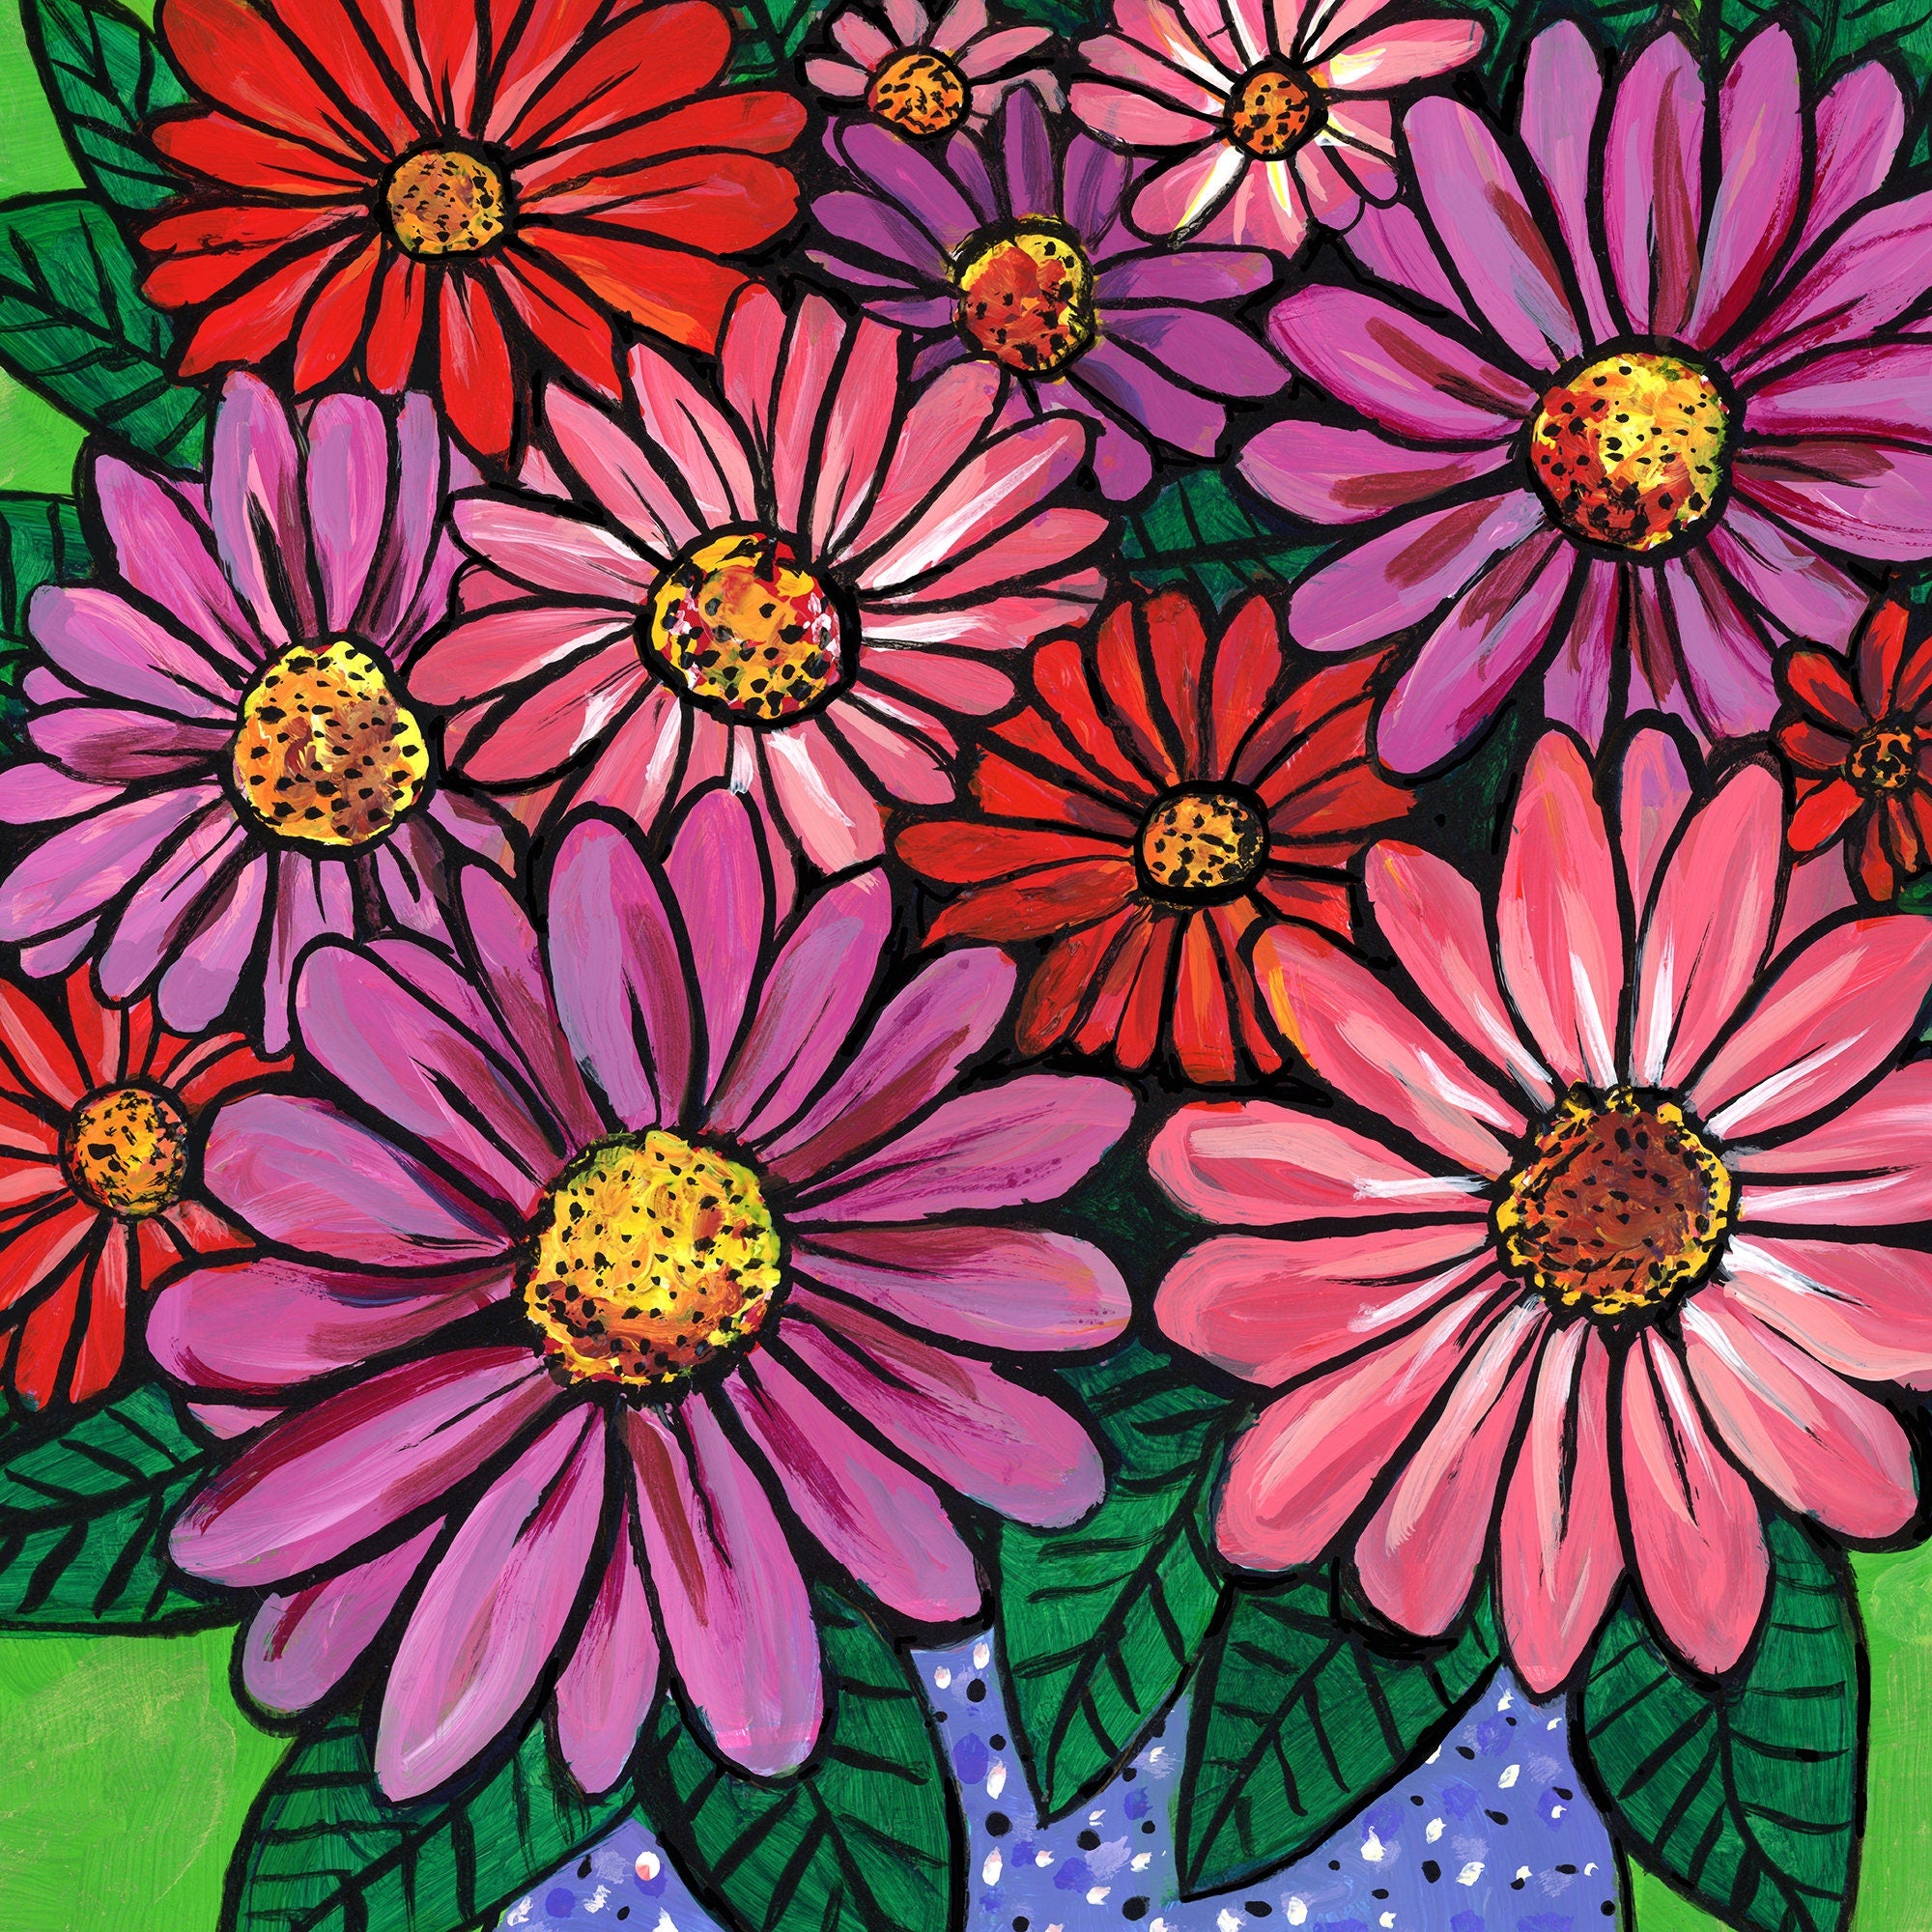 Original Gerbera Daisy Art - Colorful Acrylic Painting featuring Pink, Red, and Purple Flowers in Vase - Still Life - Framed Wall Art